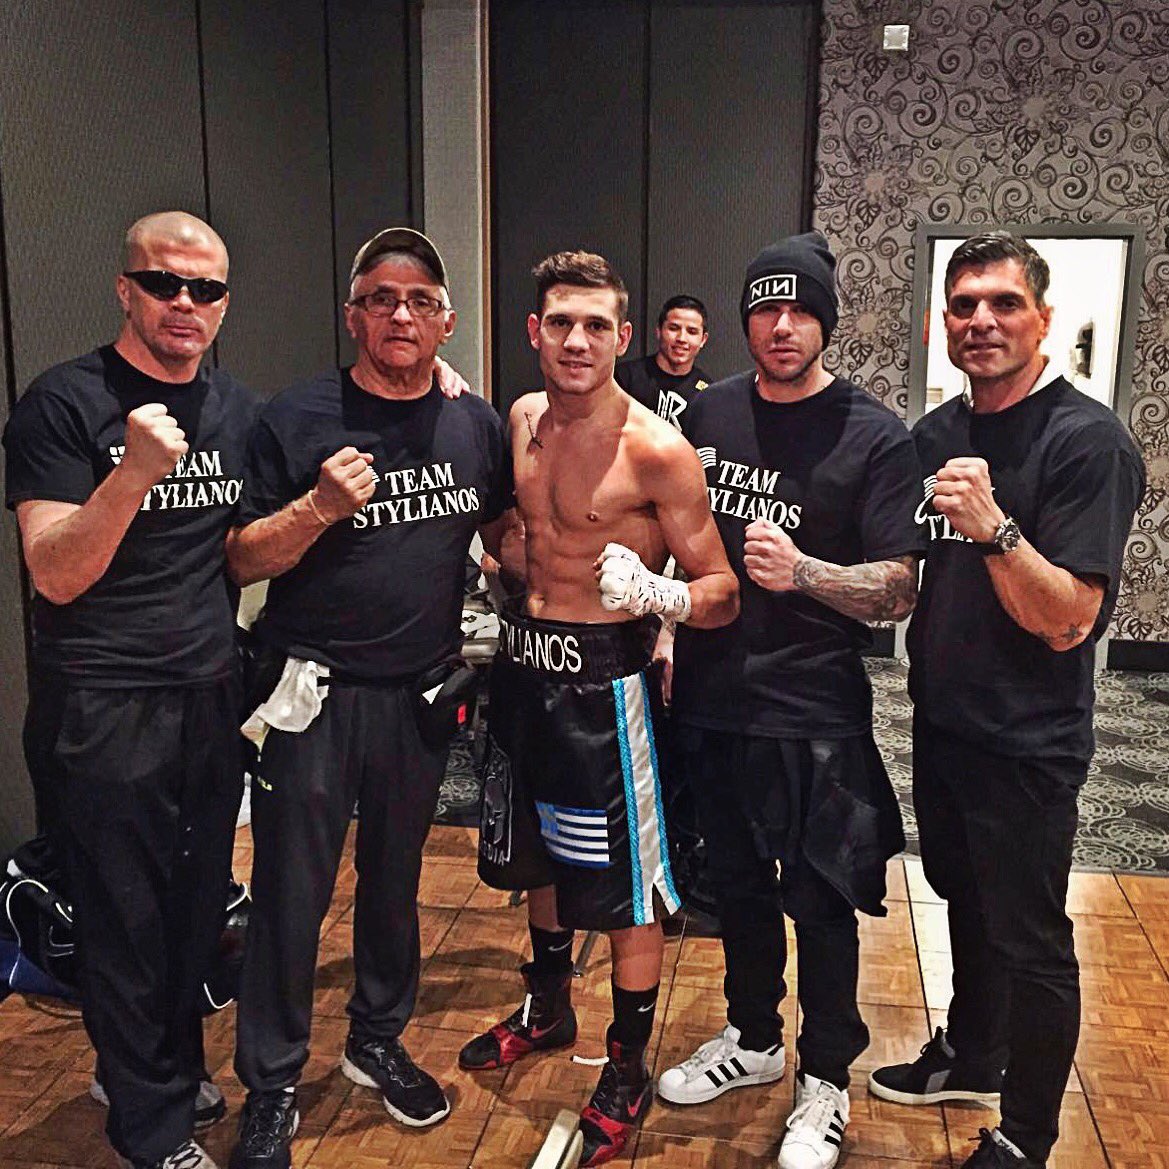 Second round win by KO! Thank you my team! #1821Media #Greece #StayHumble #TeamStylianos